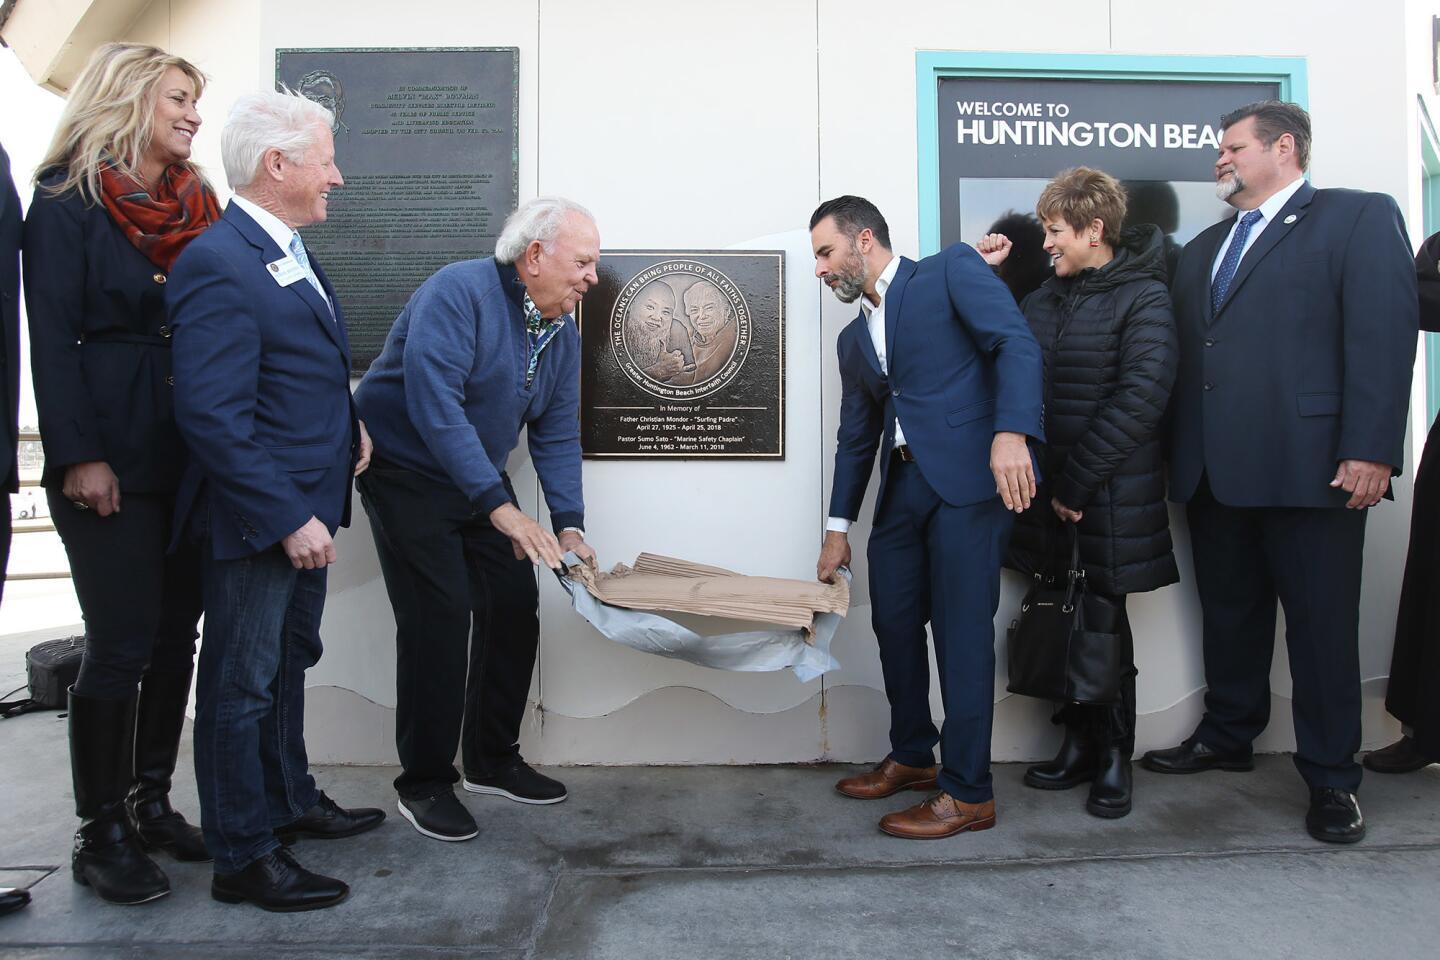 A plaque honoring late Huntington Beach pastors and surfing icons Christian Mondor and Blaine "Sumo" Sato is unveiled by Dennis Gallagher and Cesar Gutierrez and members of the City Council during a dedication ceremony Wednesday on the Huntington Beach Pier.